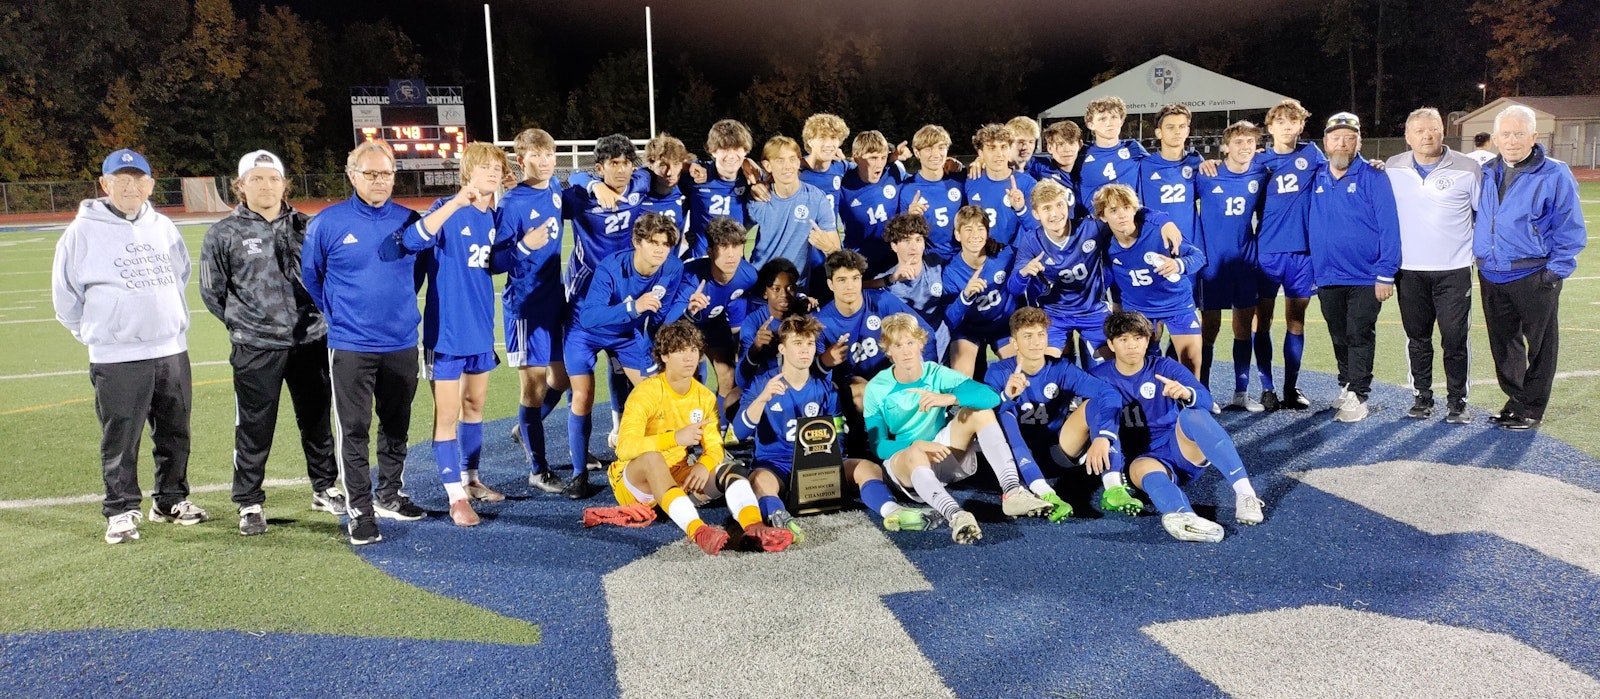 Detroit Catholic Central won in the second overtime, 3-2, against Cranbrook Kingswood for its fifth CHSL boys soccer title in the last seven years. The Shamrocks now turn their sights on a state championship to go along with ones they won in 2017 and 2020.